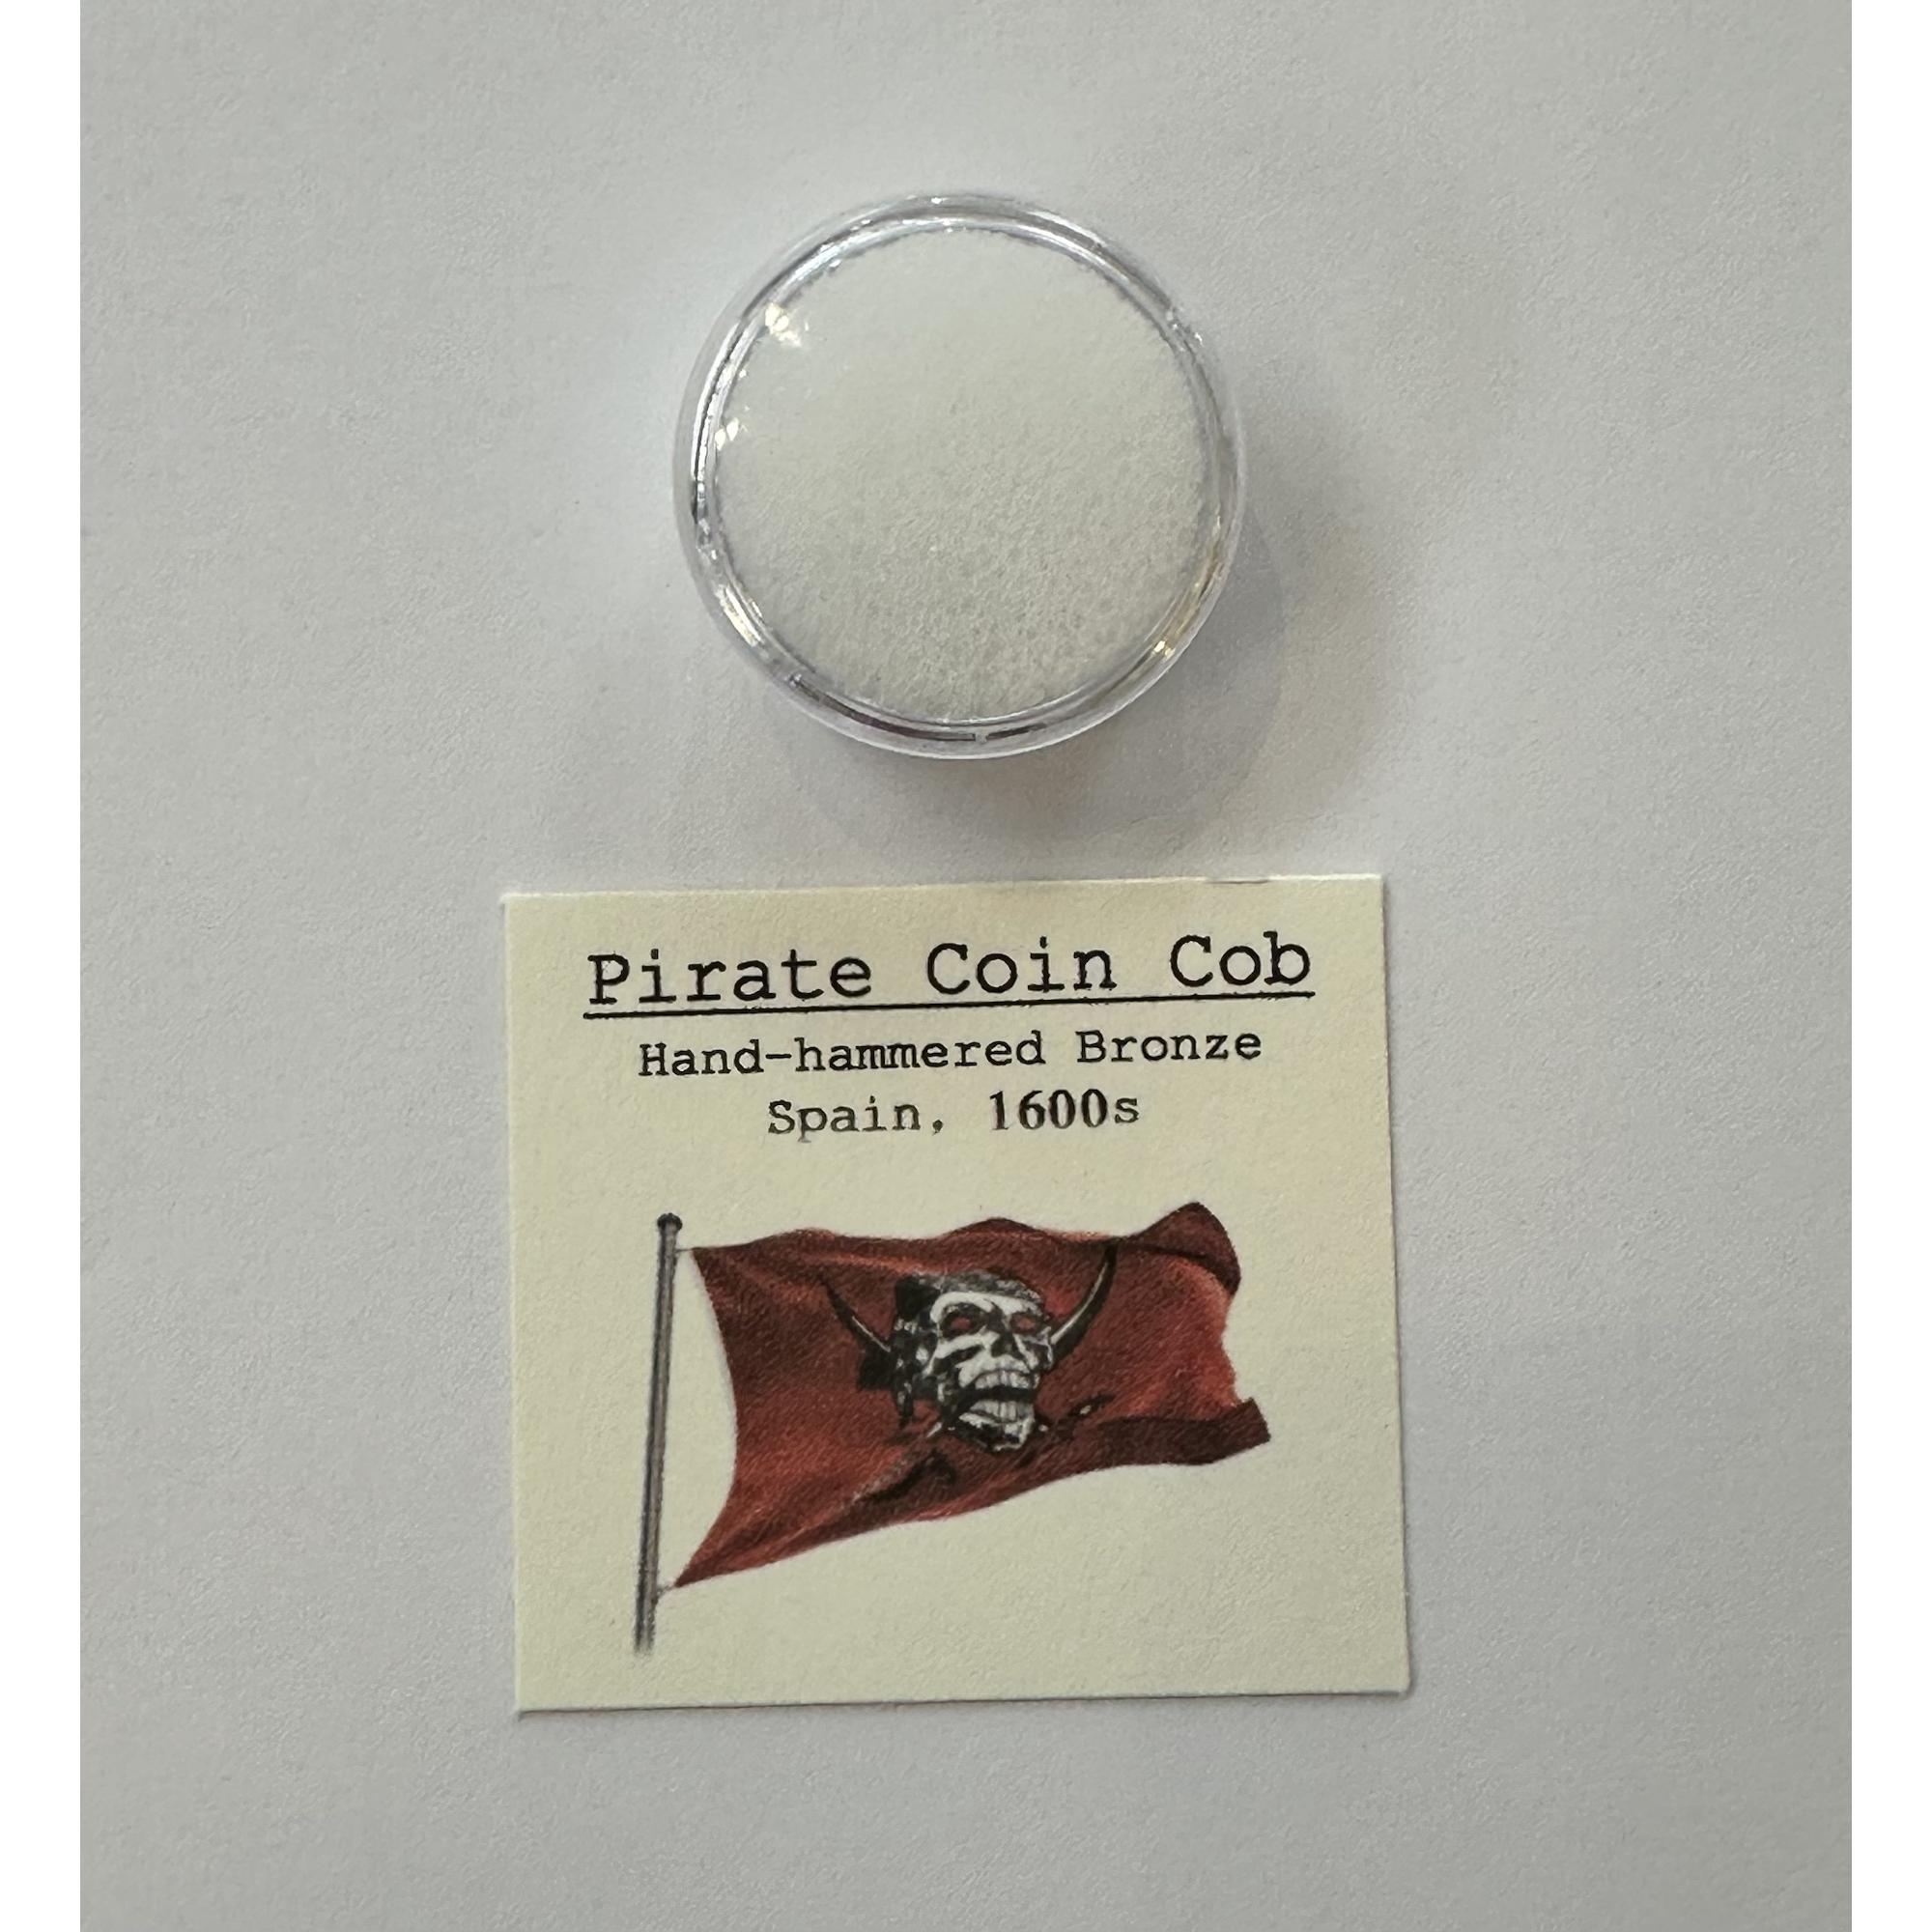 Bronze description card and jewel case for bronze pirate coin.